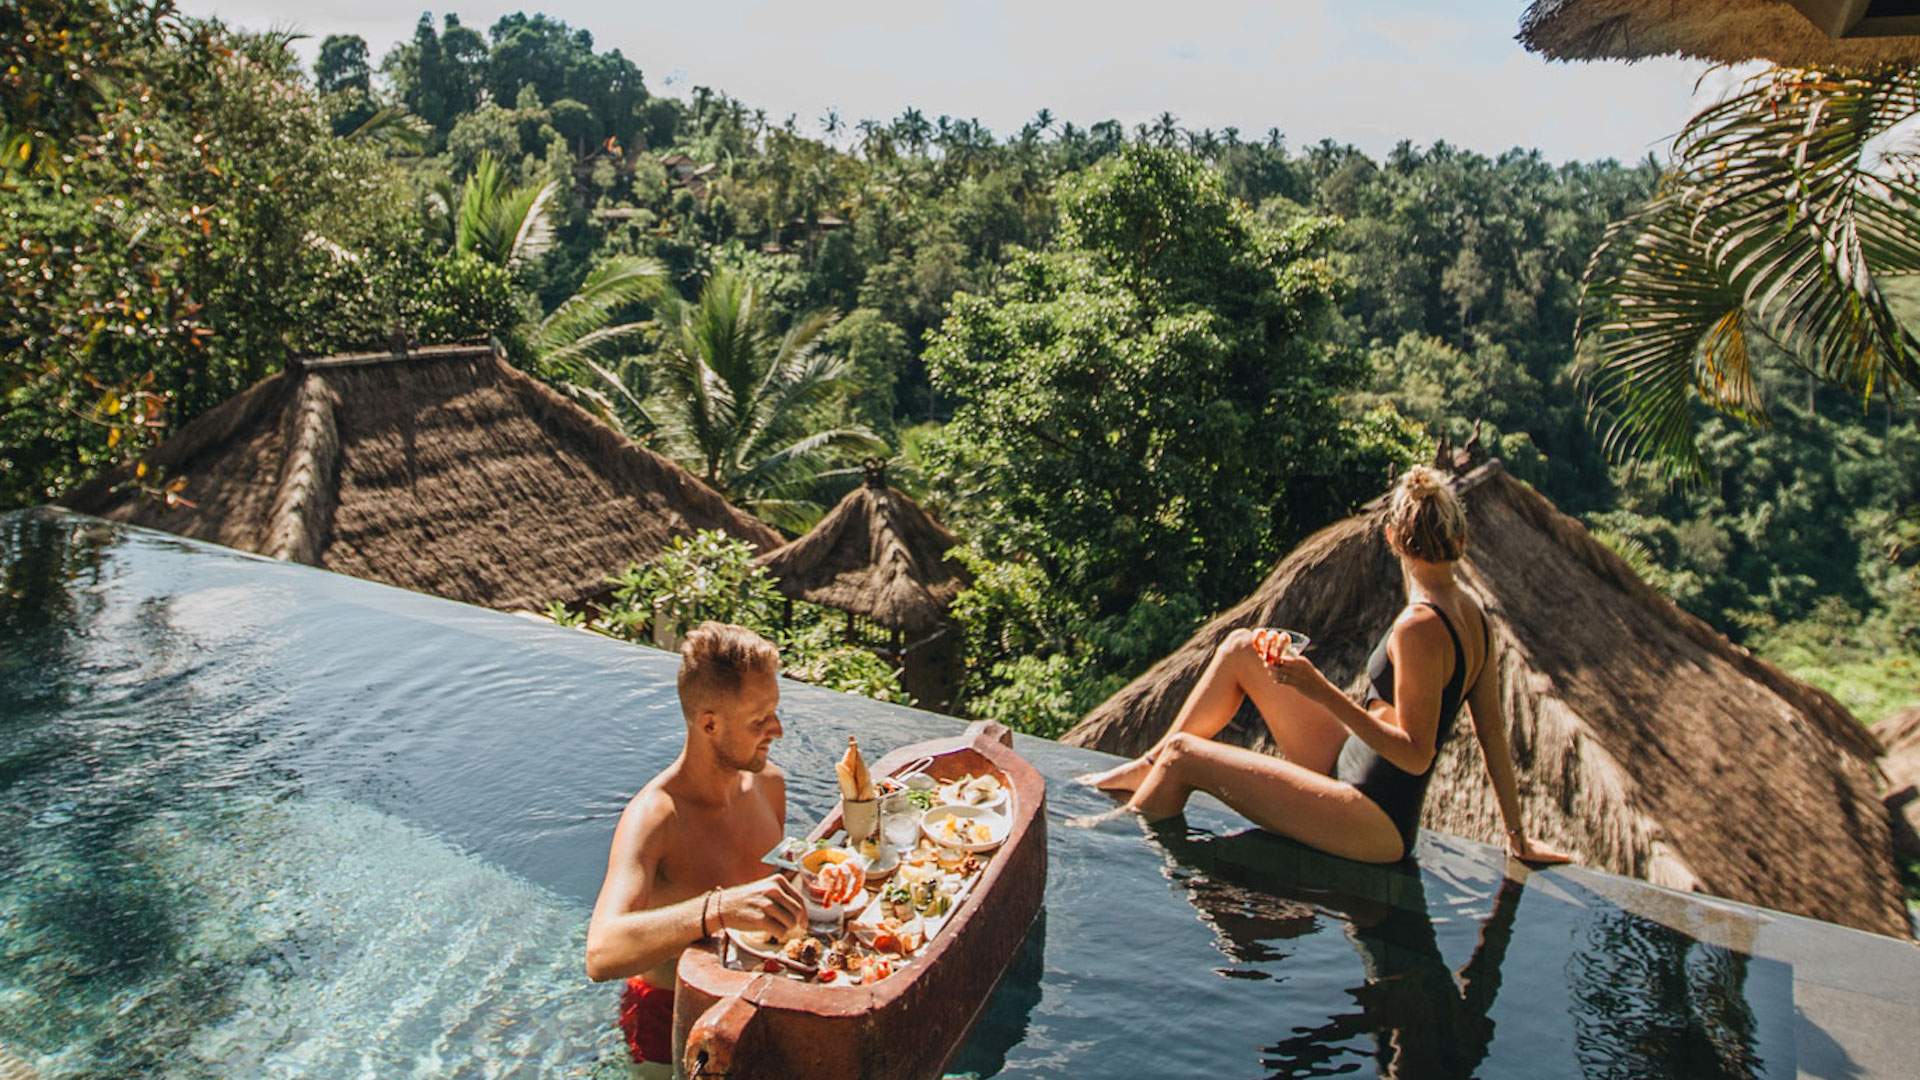 Stay of the Week: Hanging Gardens of Bali